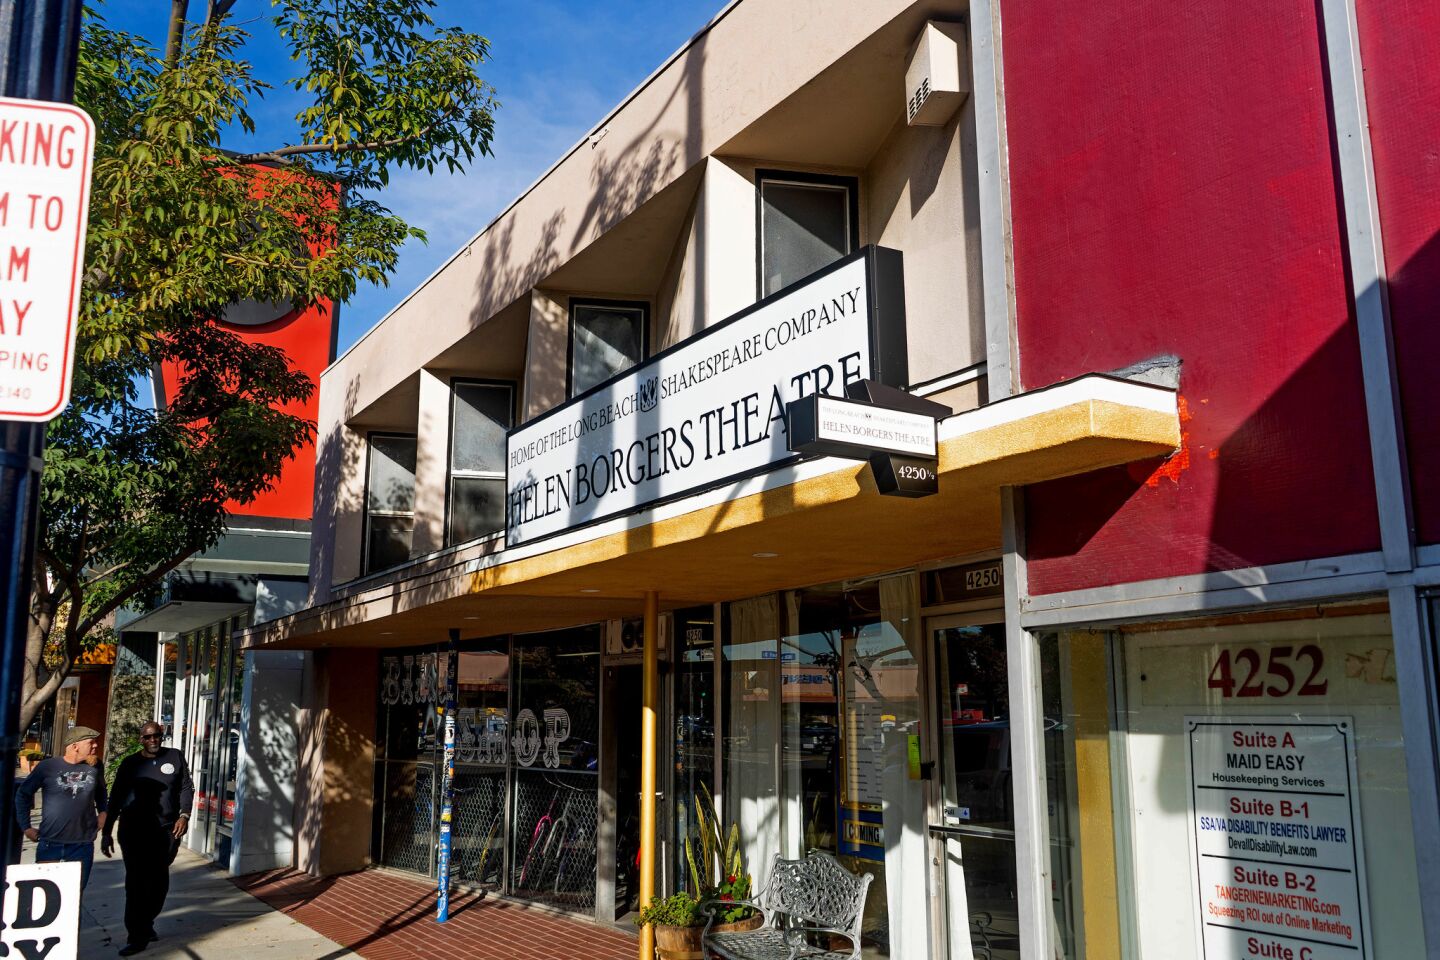 A long-term revitalization effort on Atlantic Avenue, the neighborhood’s shopping and dining strip, has paid off by creating a vibrant, walkable main drag for Bixby Knolls.